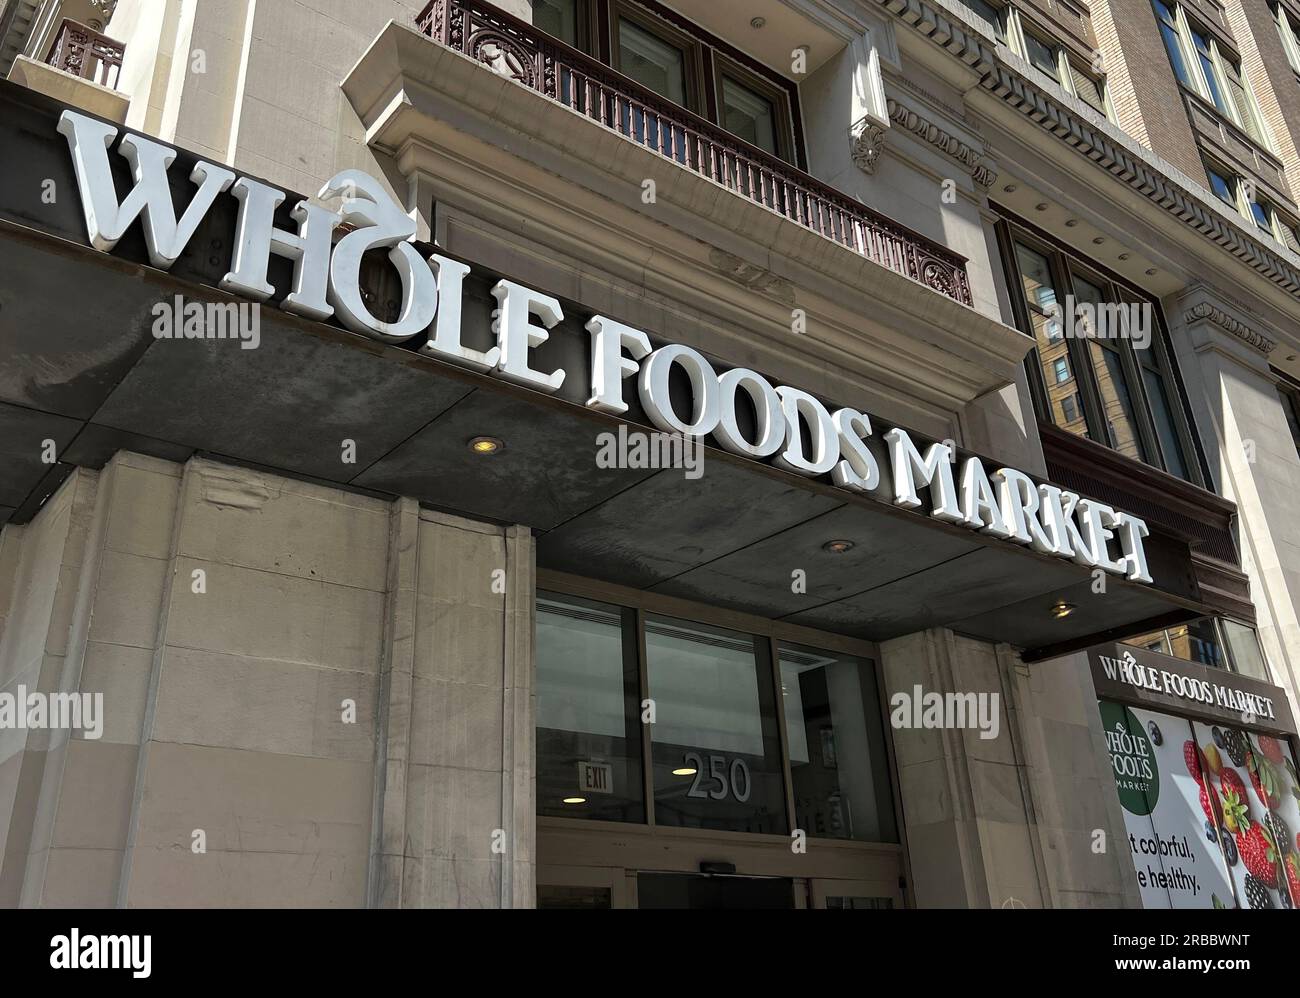 https://c8.alamy.com/comp/2RBBWNT/exterior-of-a-whole-foods-market-location-in-the-chelsea-neighborhood-of-manhattan-2RBBWNT.jpg